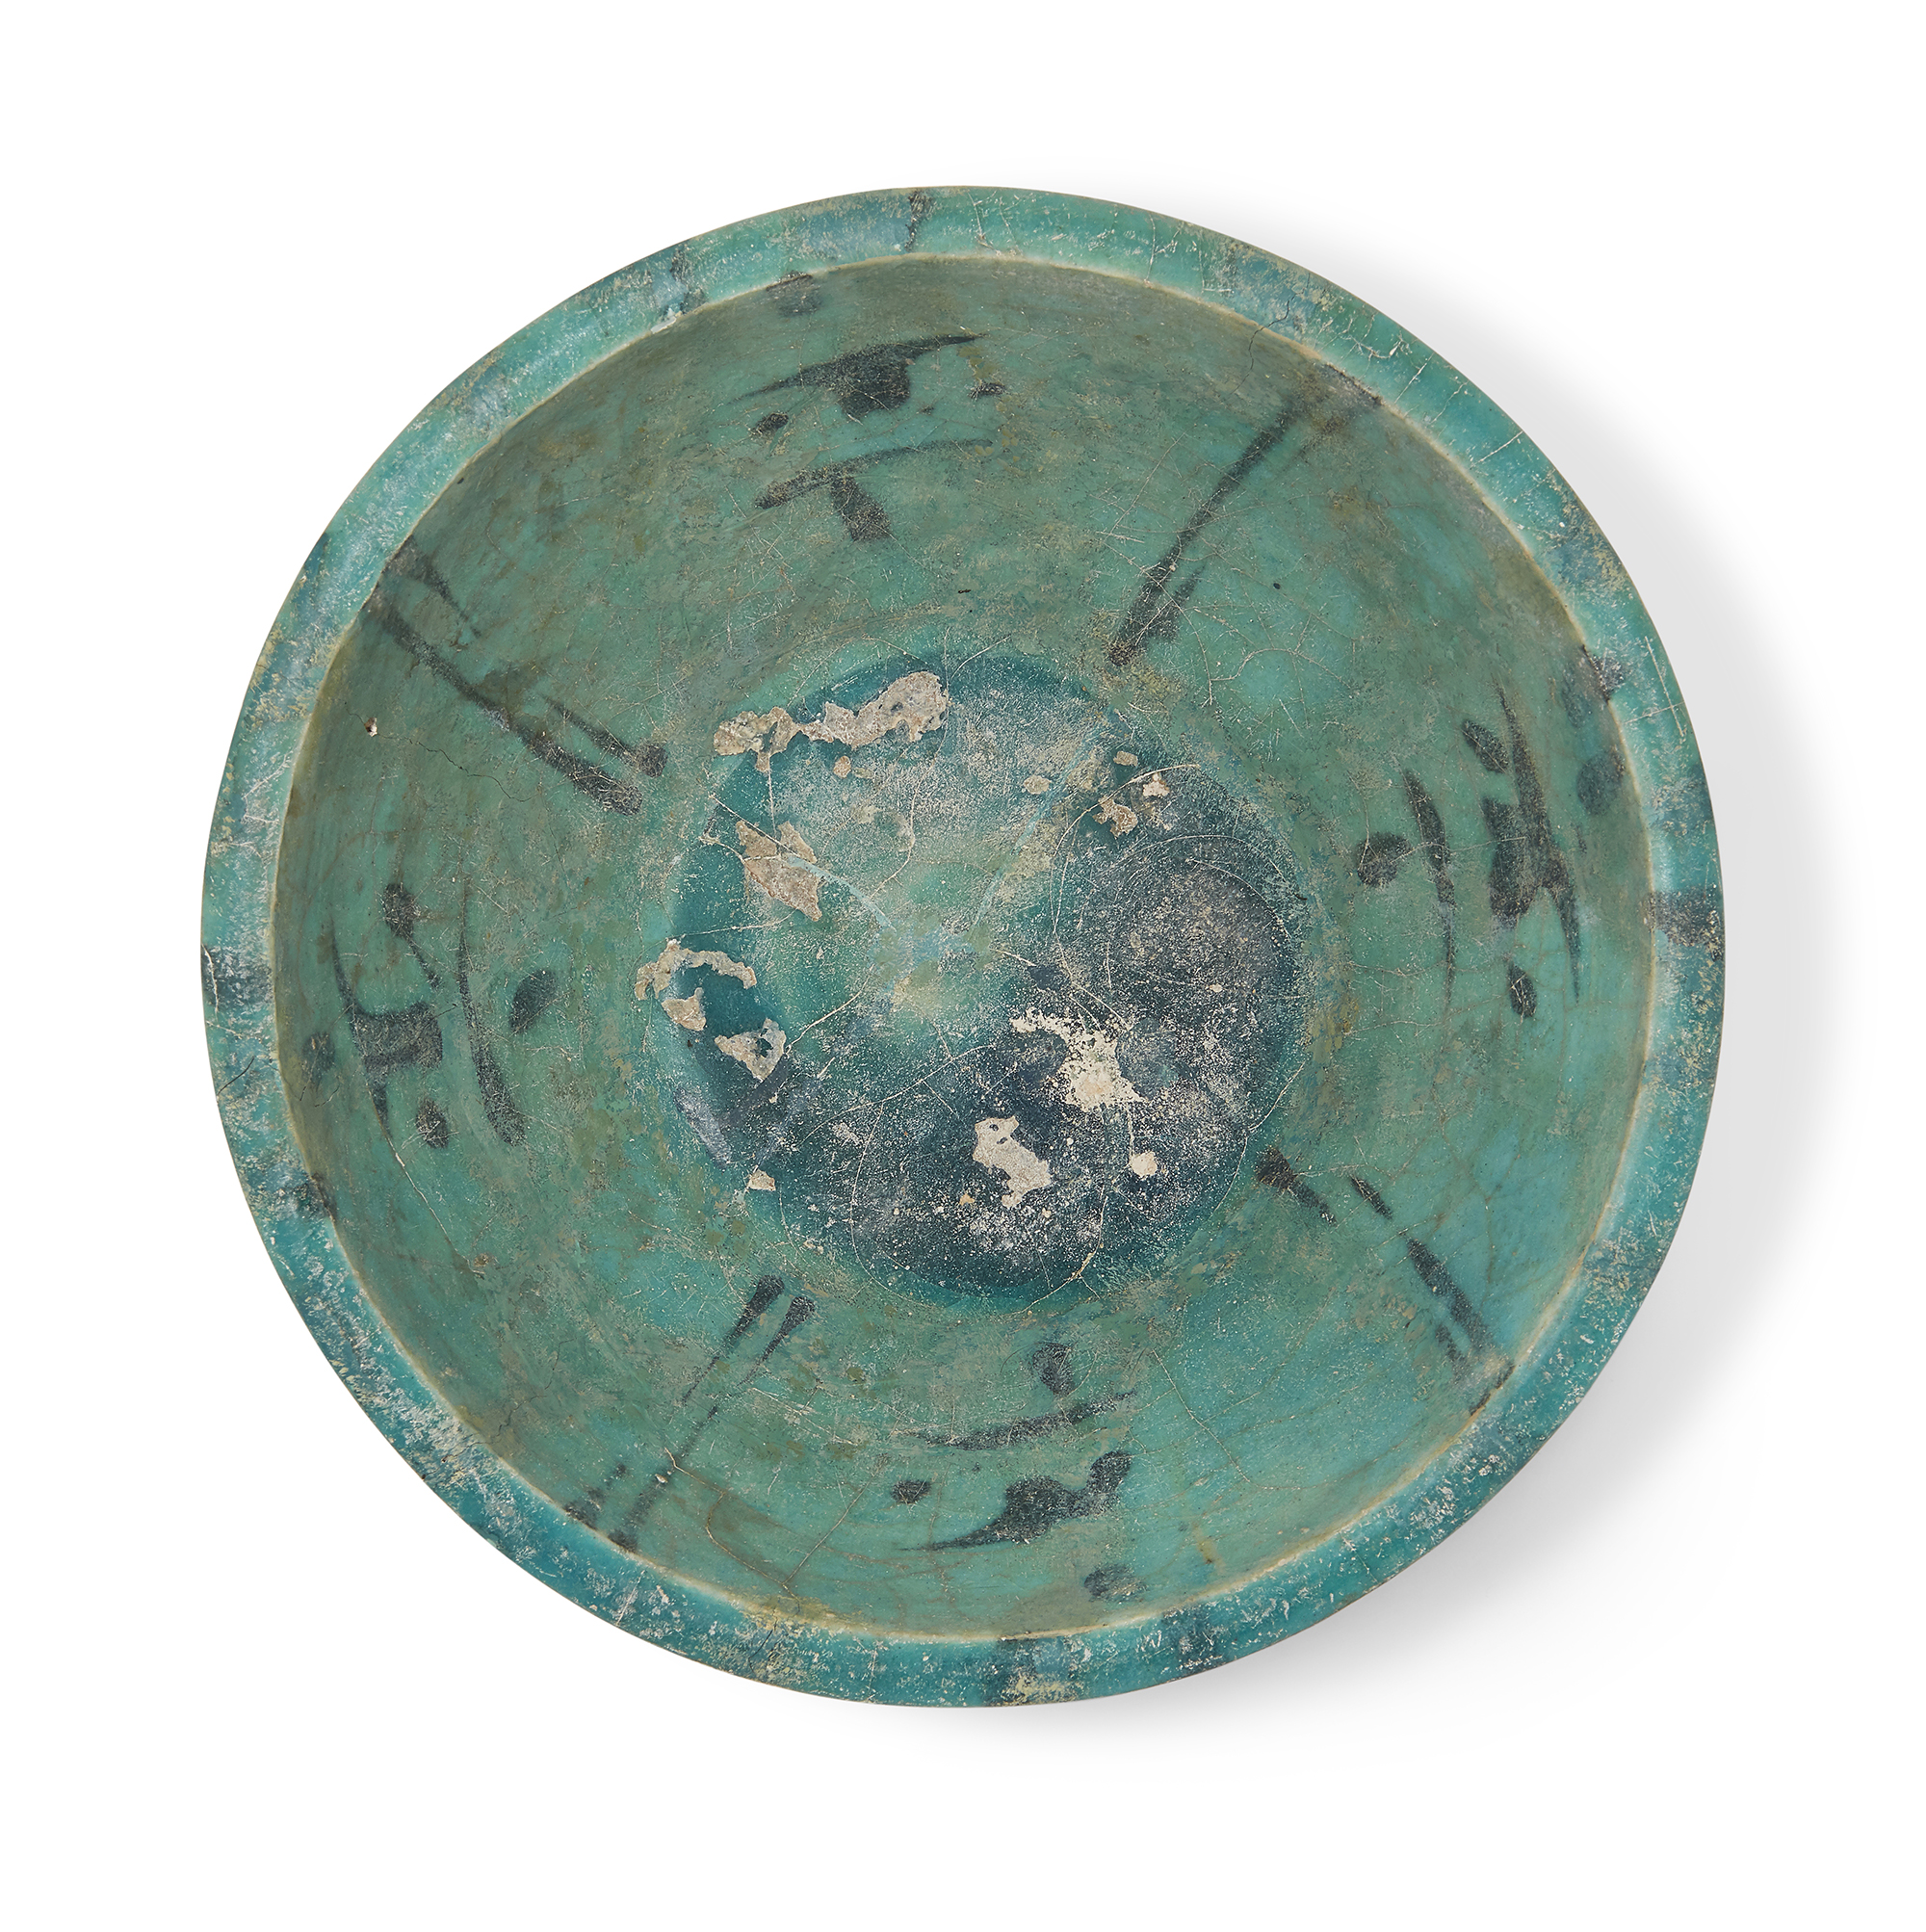 An intact Kashan turquoise glazed bowl, Iran, 13th century, Of deep, conical form, with radiati...